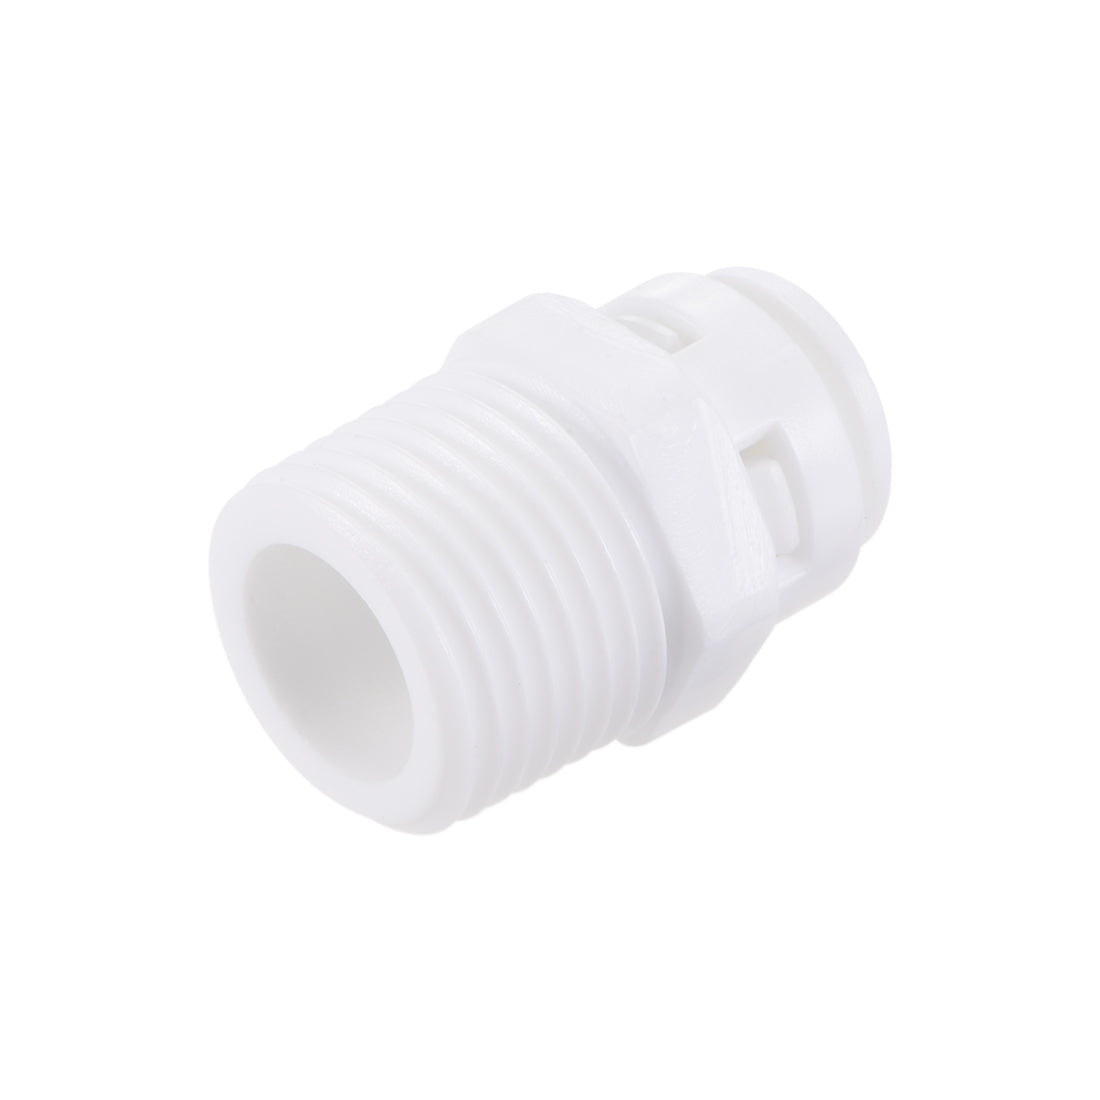 uxcell Uxcell Quick Connector G1/2 Male Thread to 3/8" Tube, Straight Connect Fittings for Water Purifier, 30mm White 2Pcs